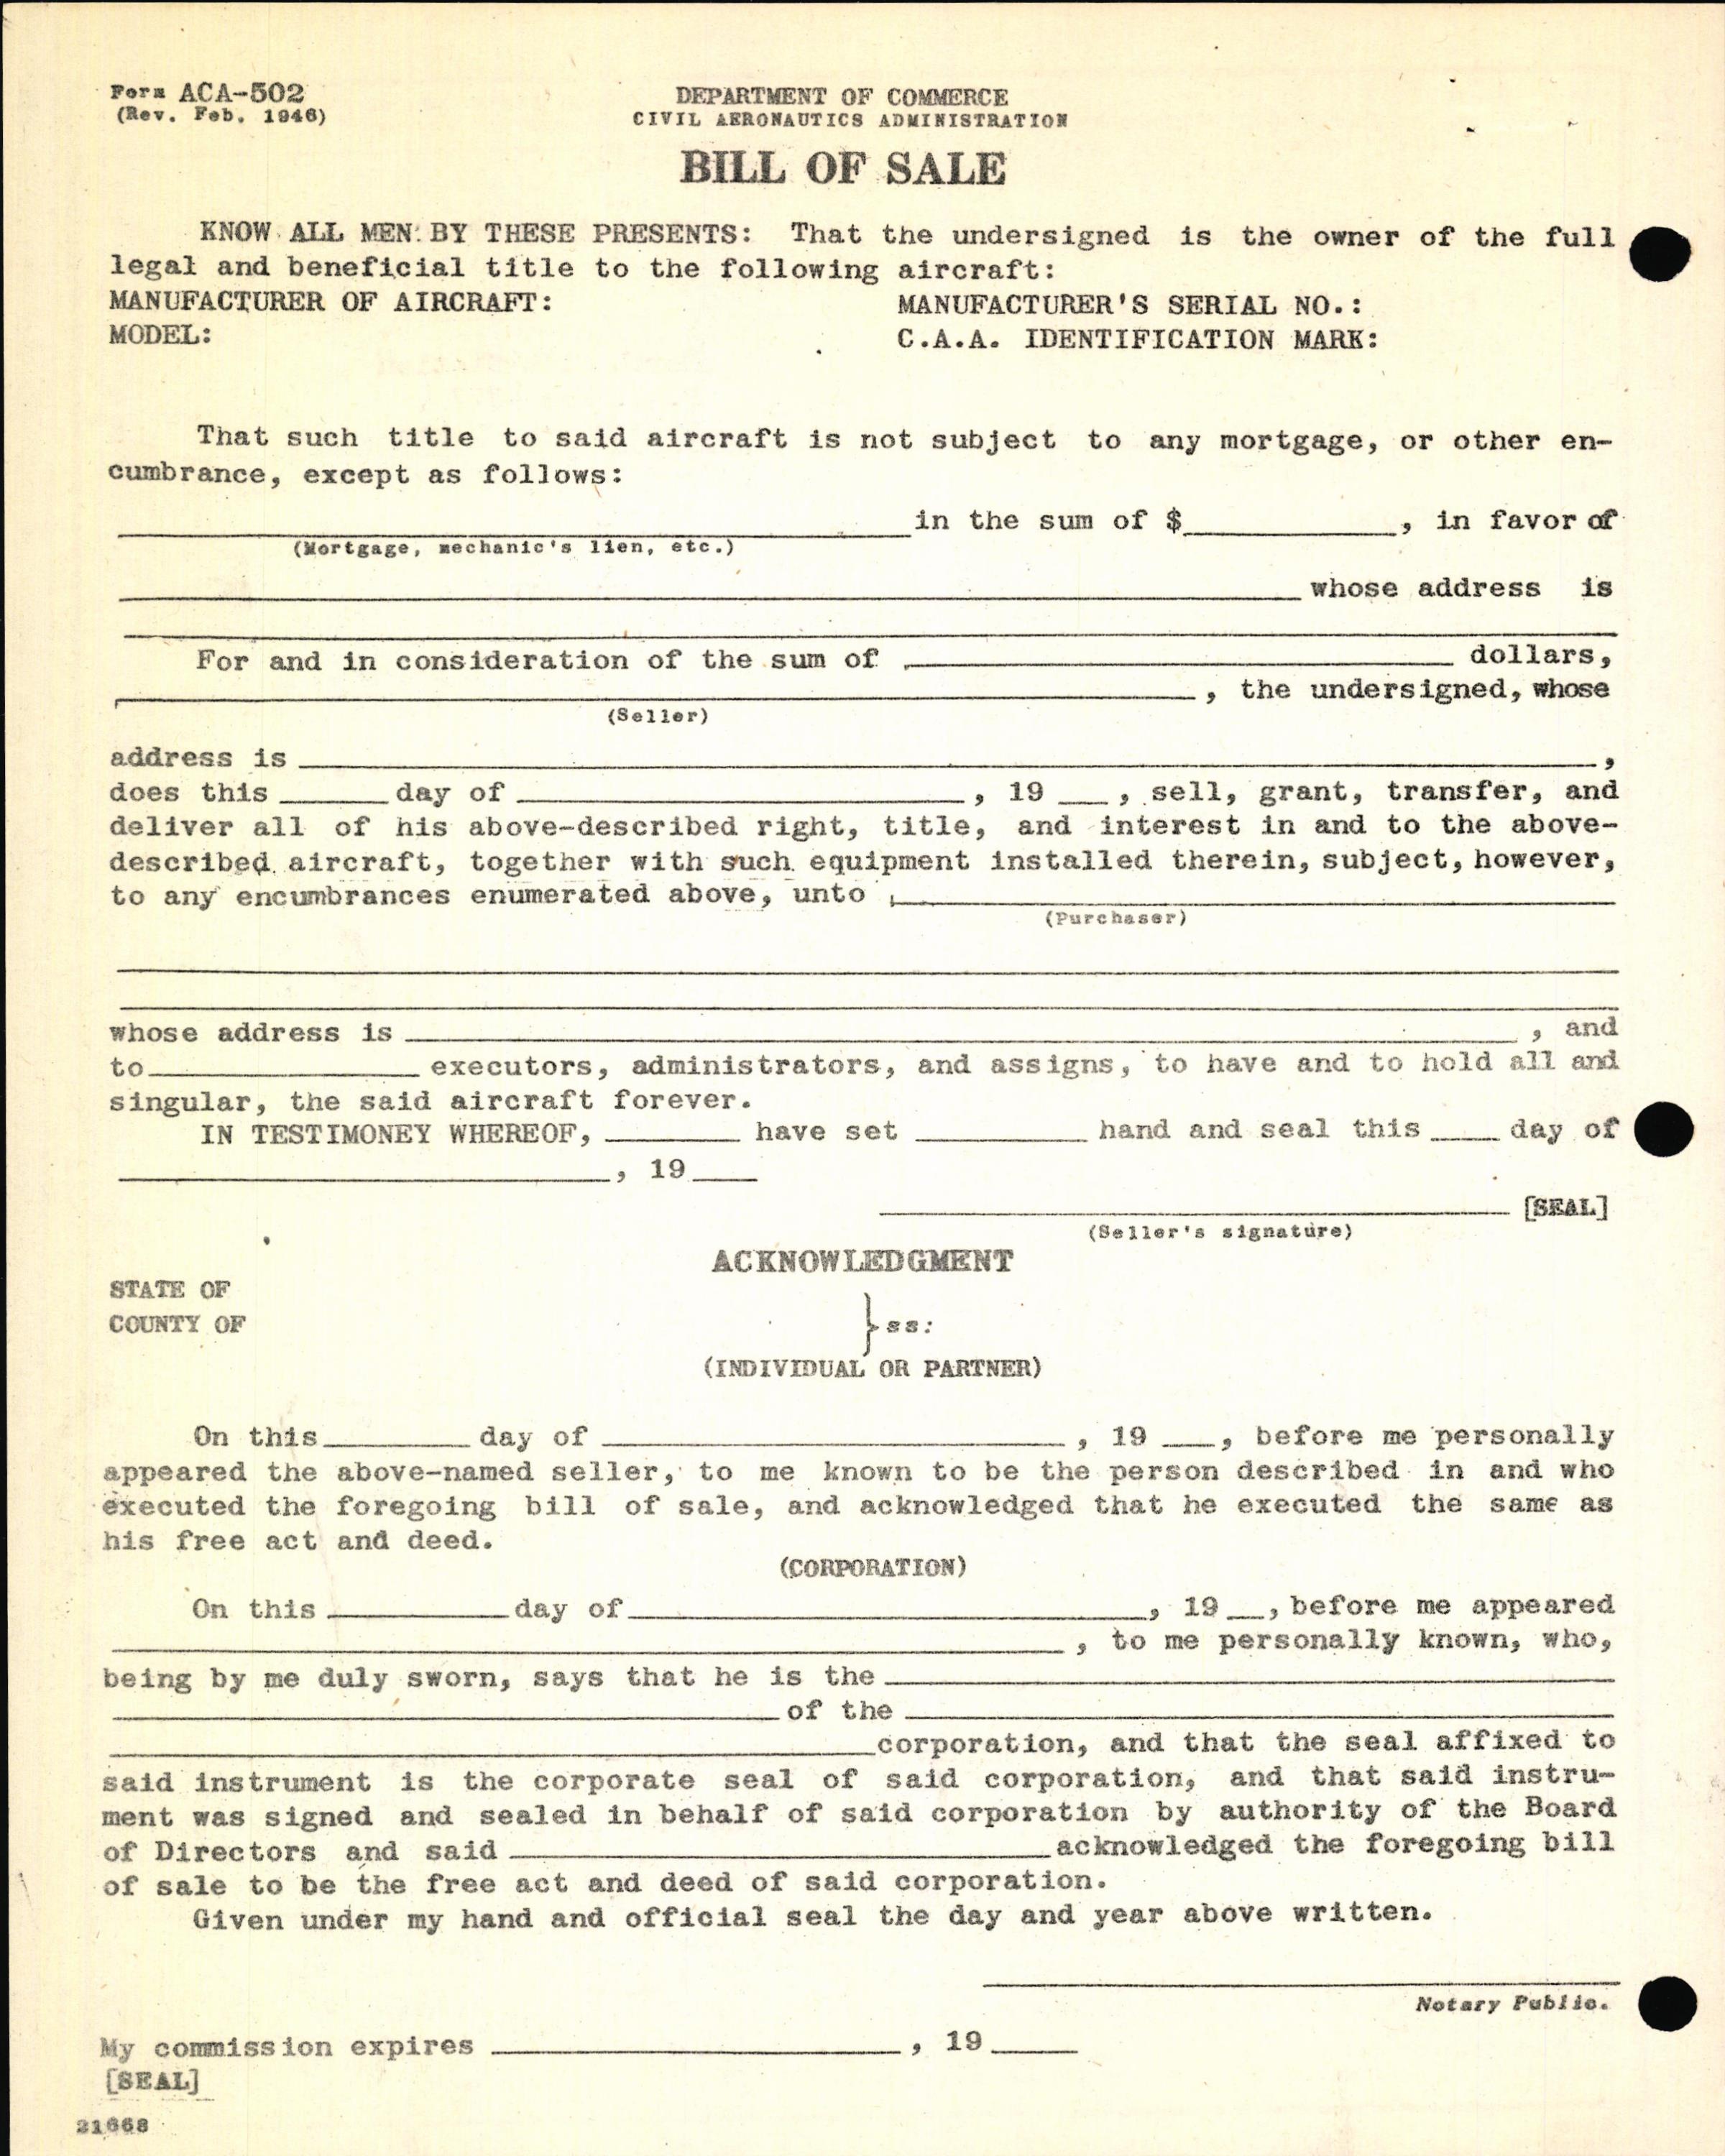 Sample page 6 from AirCorps Library document: Technical Information for Serial Number 1208